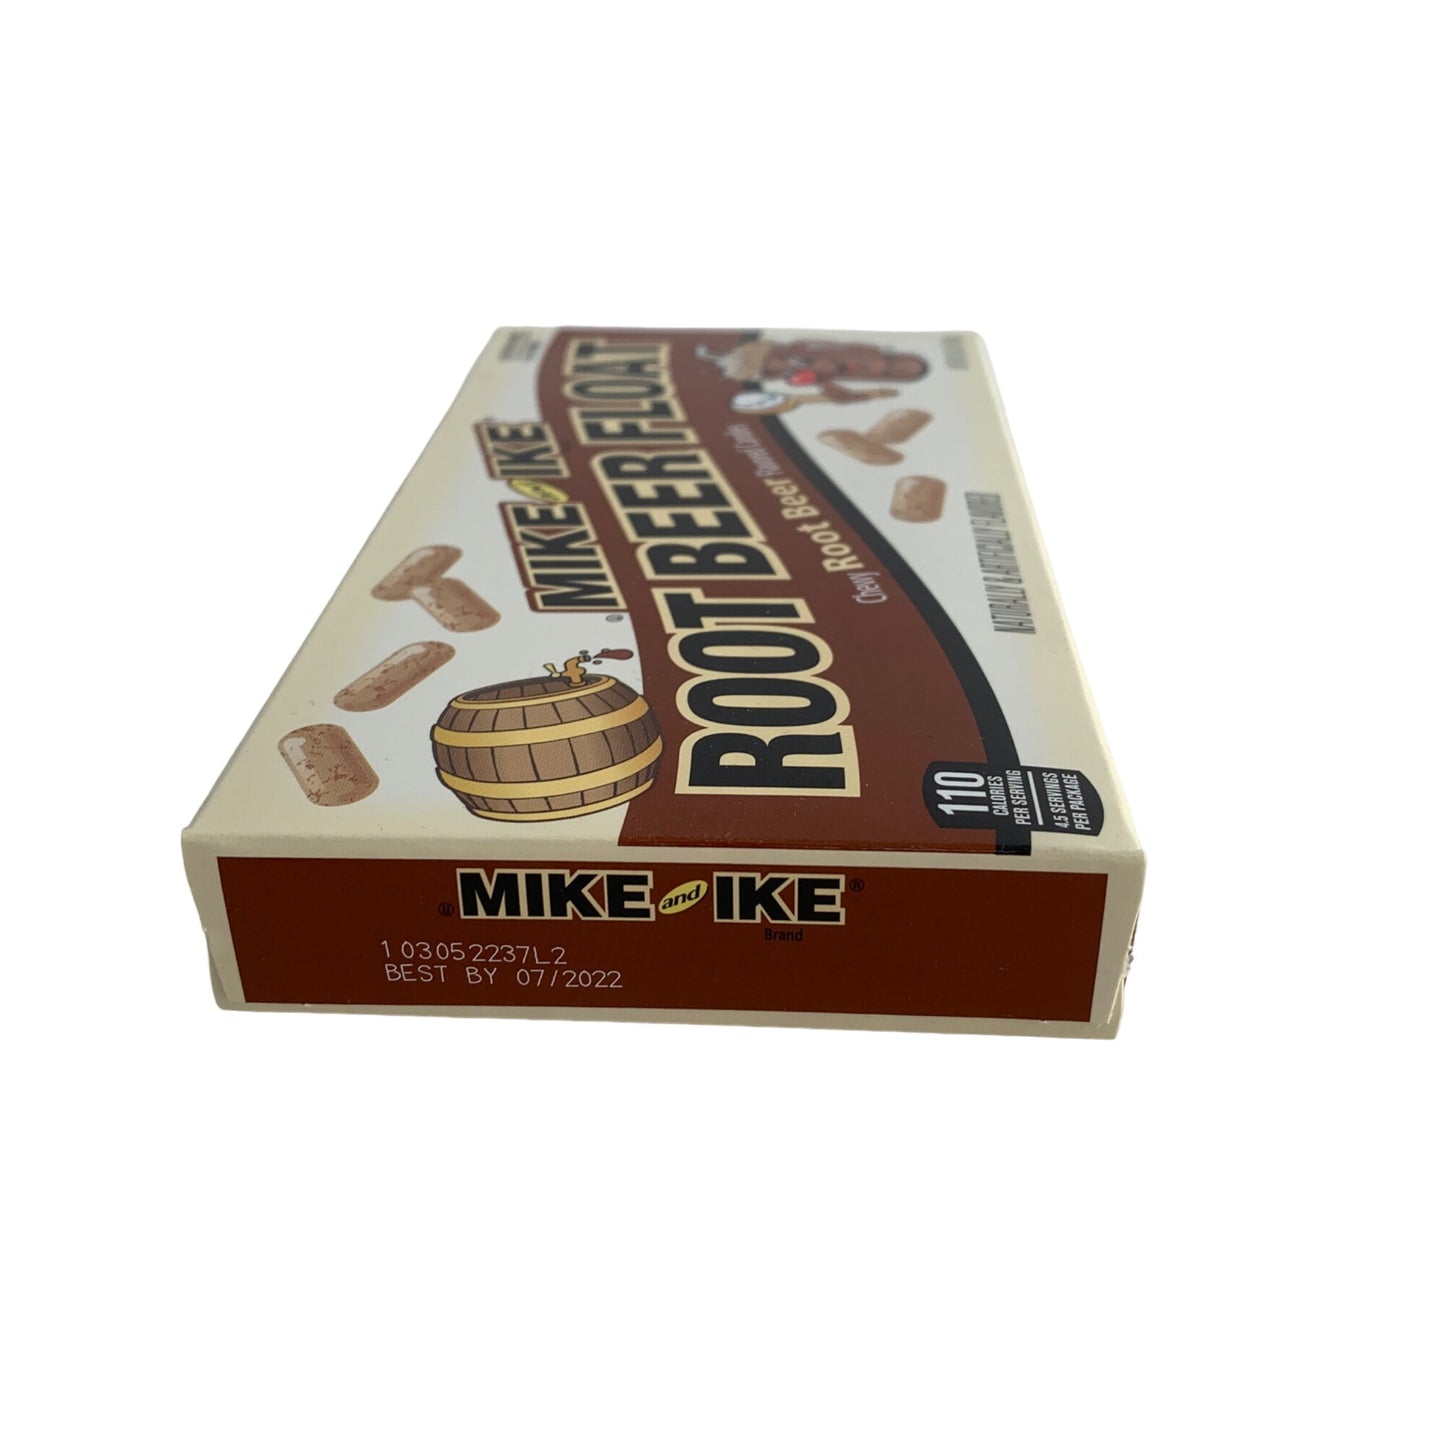 Mike and Ike Root Beer Float Discontinued Rare Theater Box 5 oz.